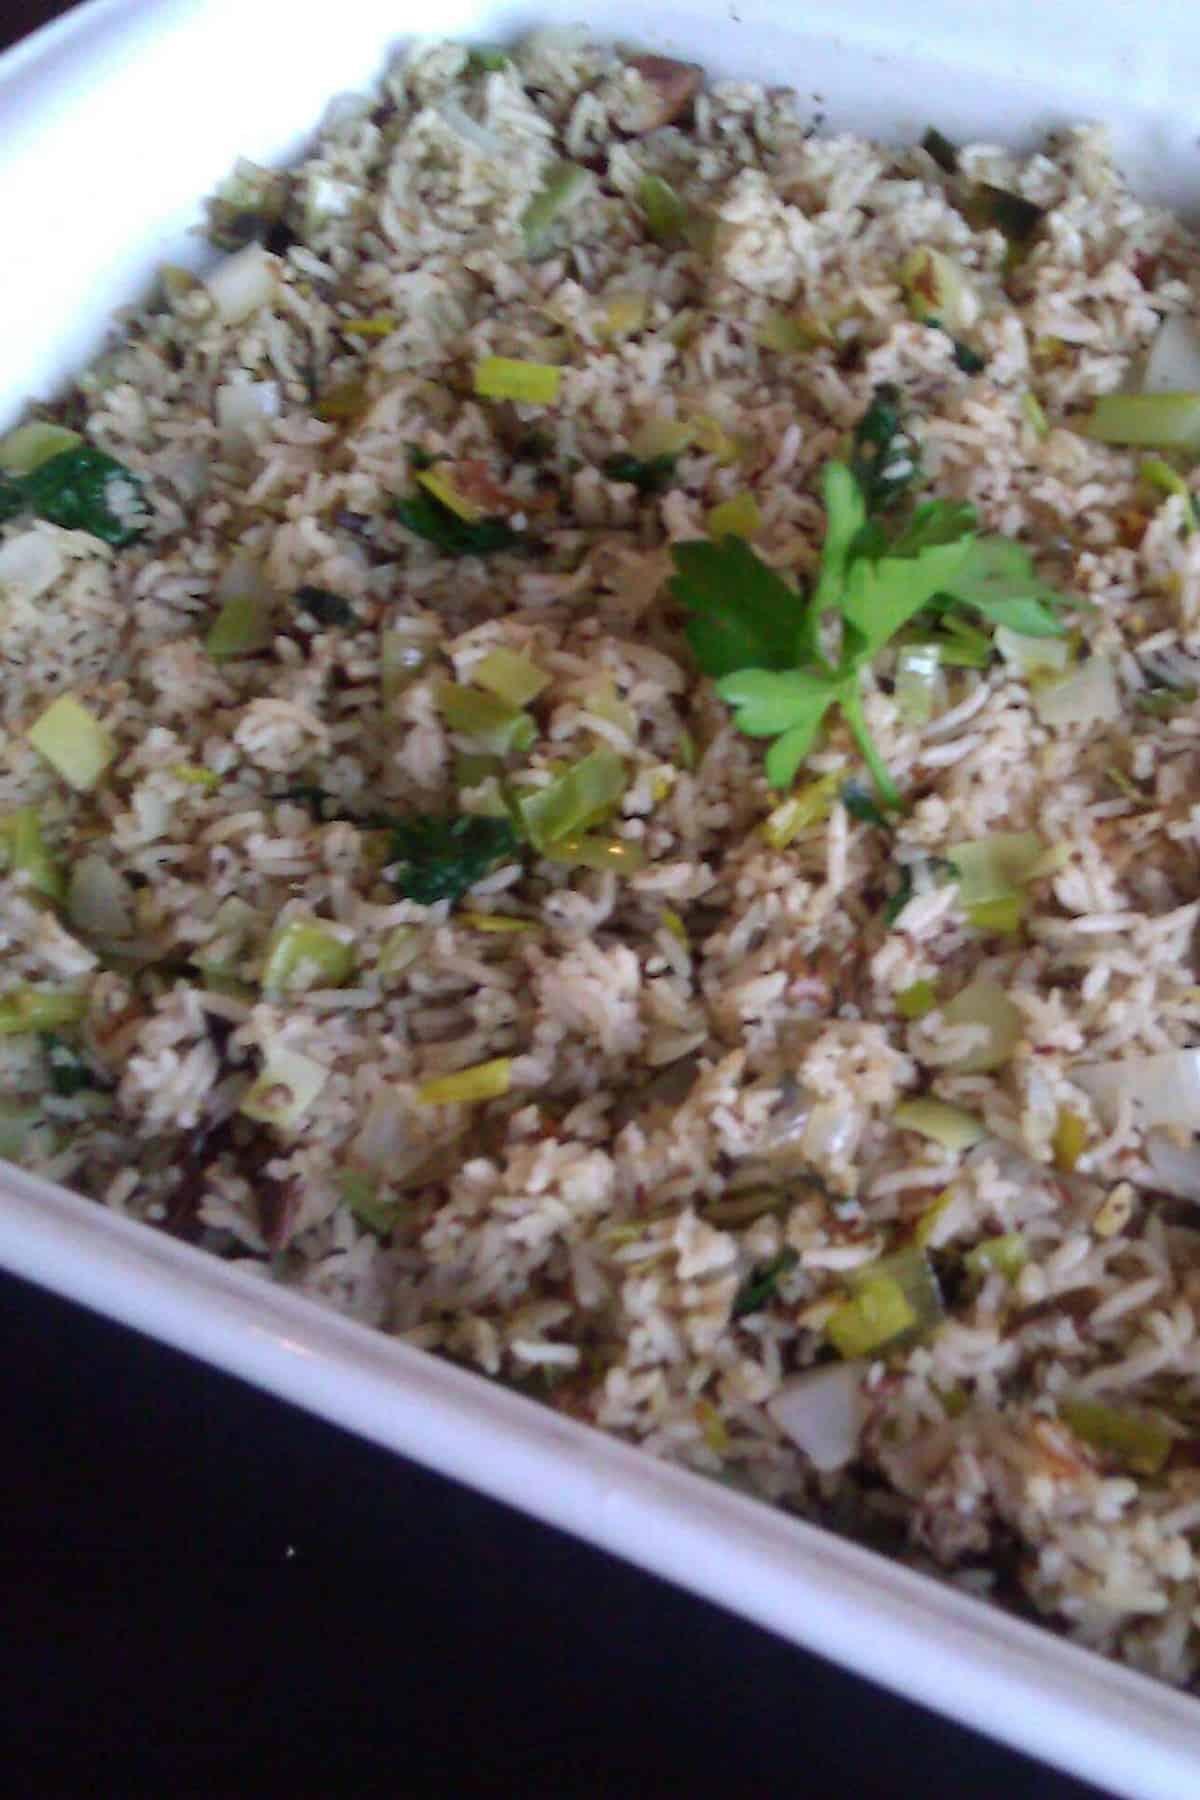 Smoked Oyster & Rice Stuffing: A Smoky Flavorful Delight!